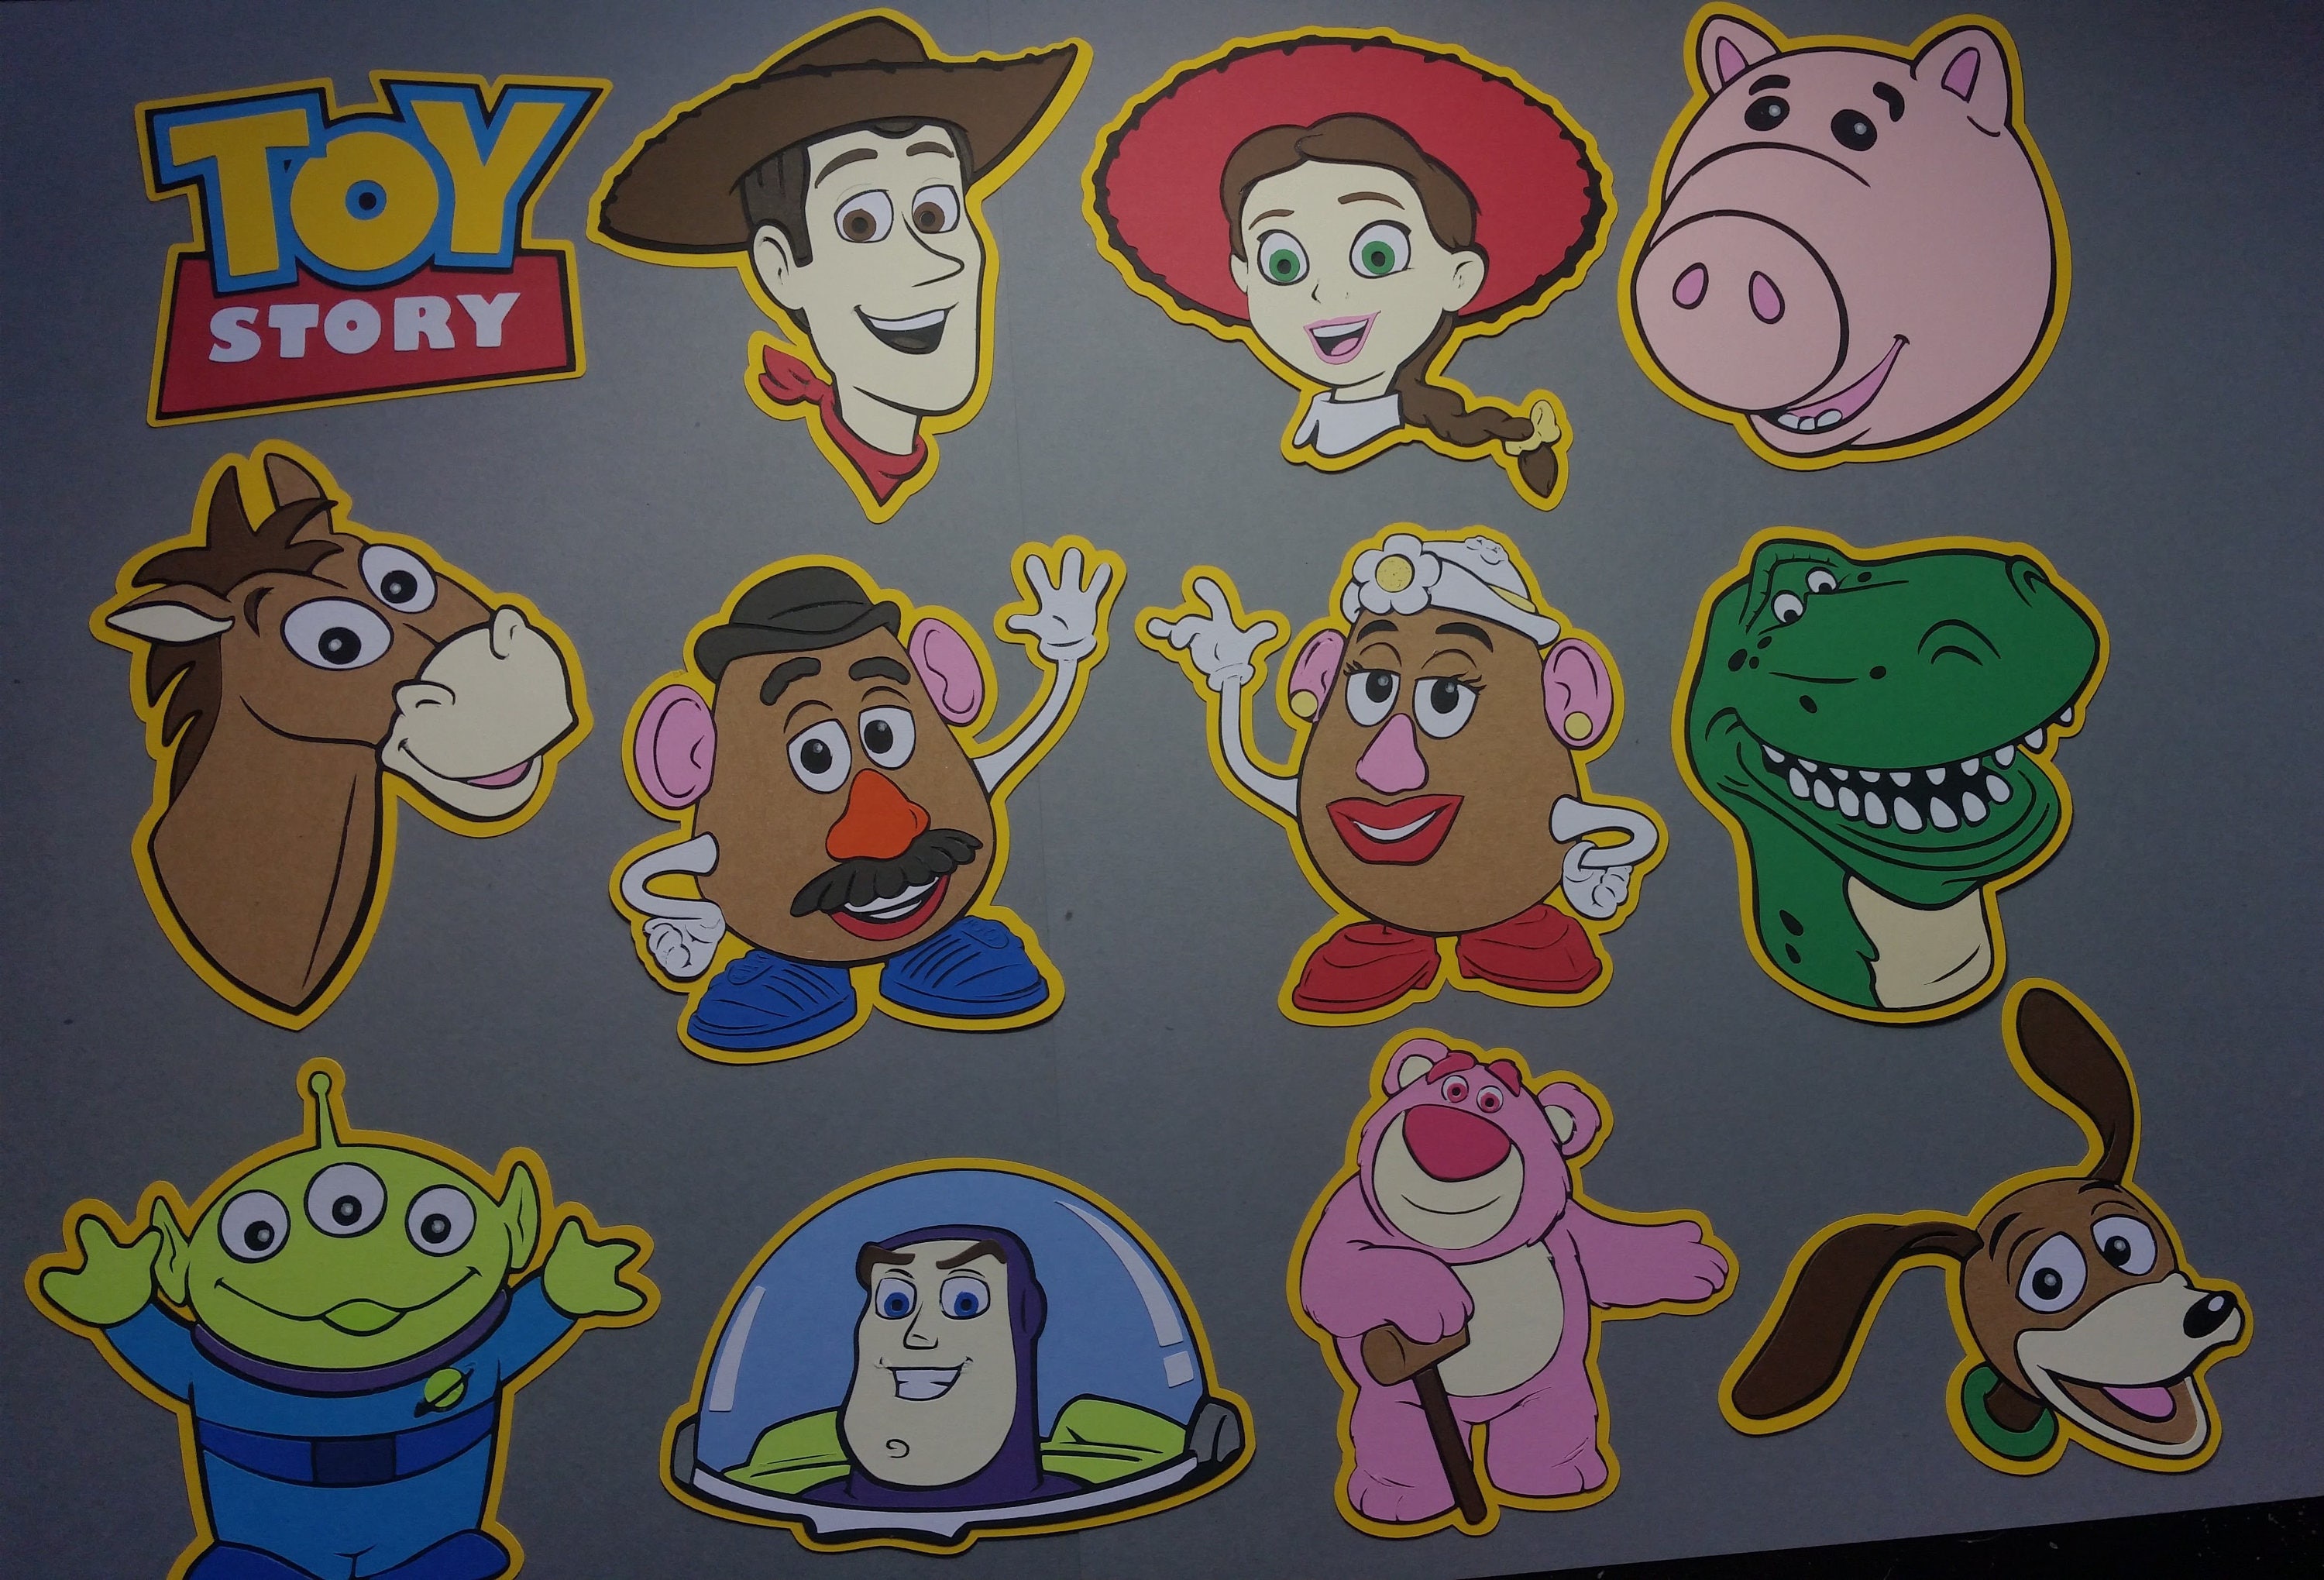 Set of 12 Cupcake Toppers Featuring Toy Story Characters-Cake